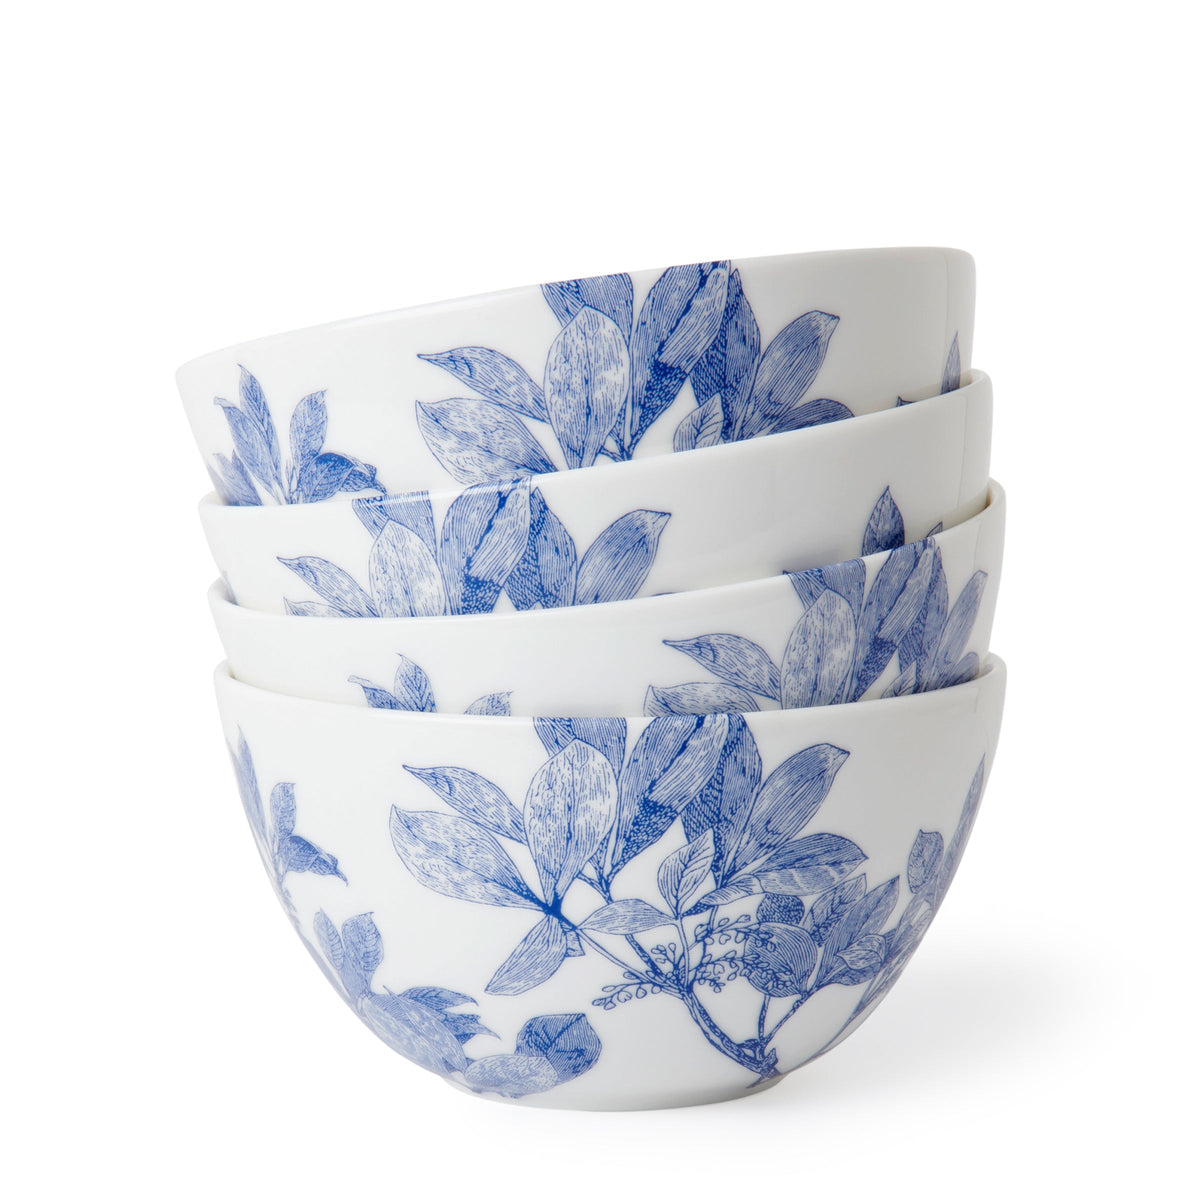 A stack of four Arbor Cereal Bowls by Caskata, featuring a tall slanted silhouette ideal for cereal, with blue floral and leaf patterns.